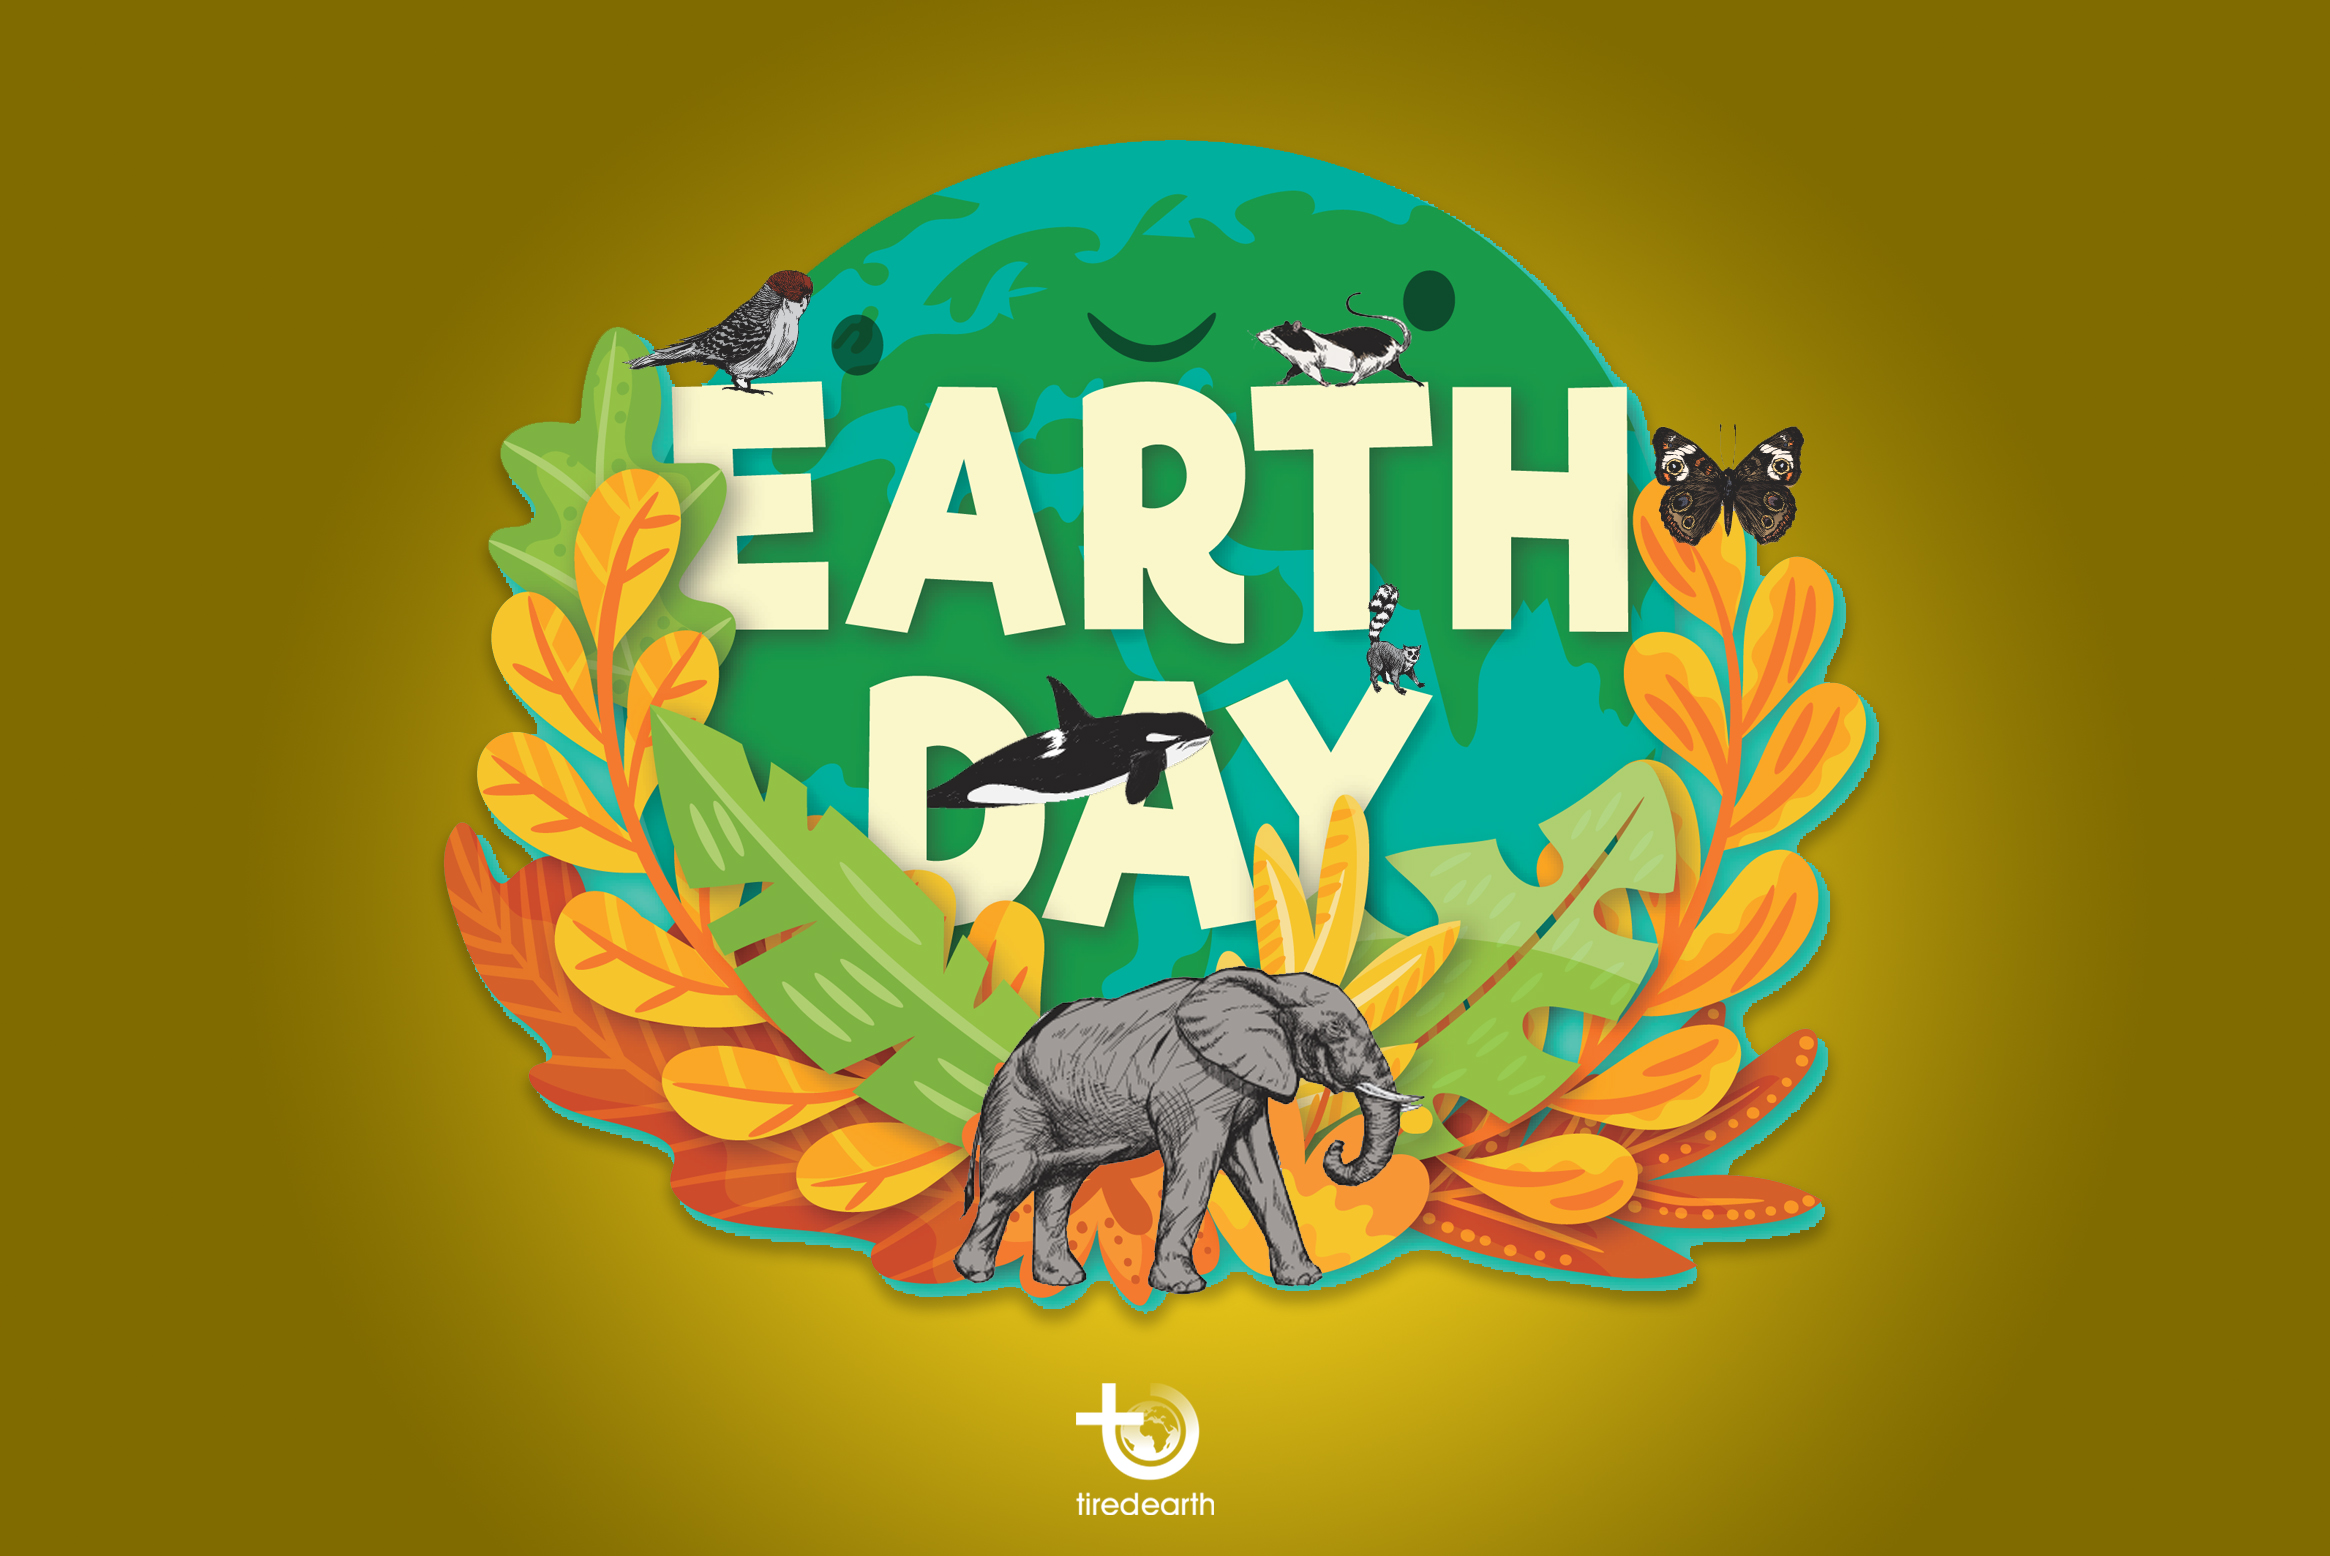 Earth Day- A Day To Imagine The Future Of Humans And Species